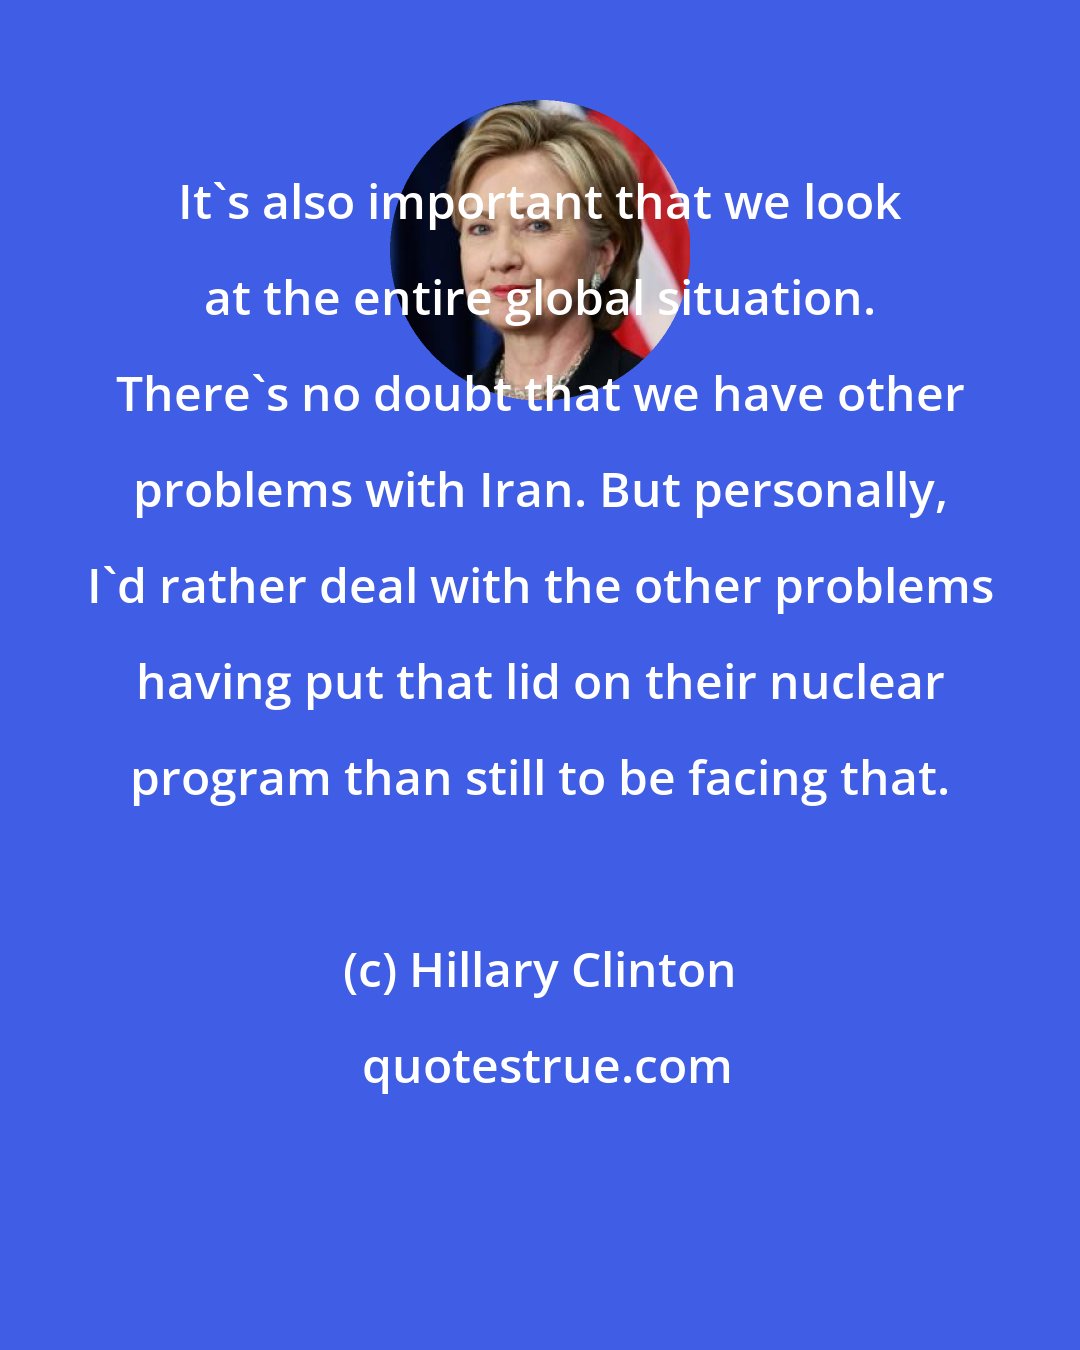 Hillary Clinton: It's also important that we look at the entire global situation. There's no doubt that we have other problems with Iran. But personally, I'd rather deal with the other problems having put that lid on their nuclear program than still to be facing that.